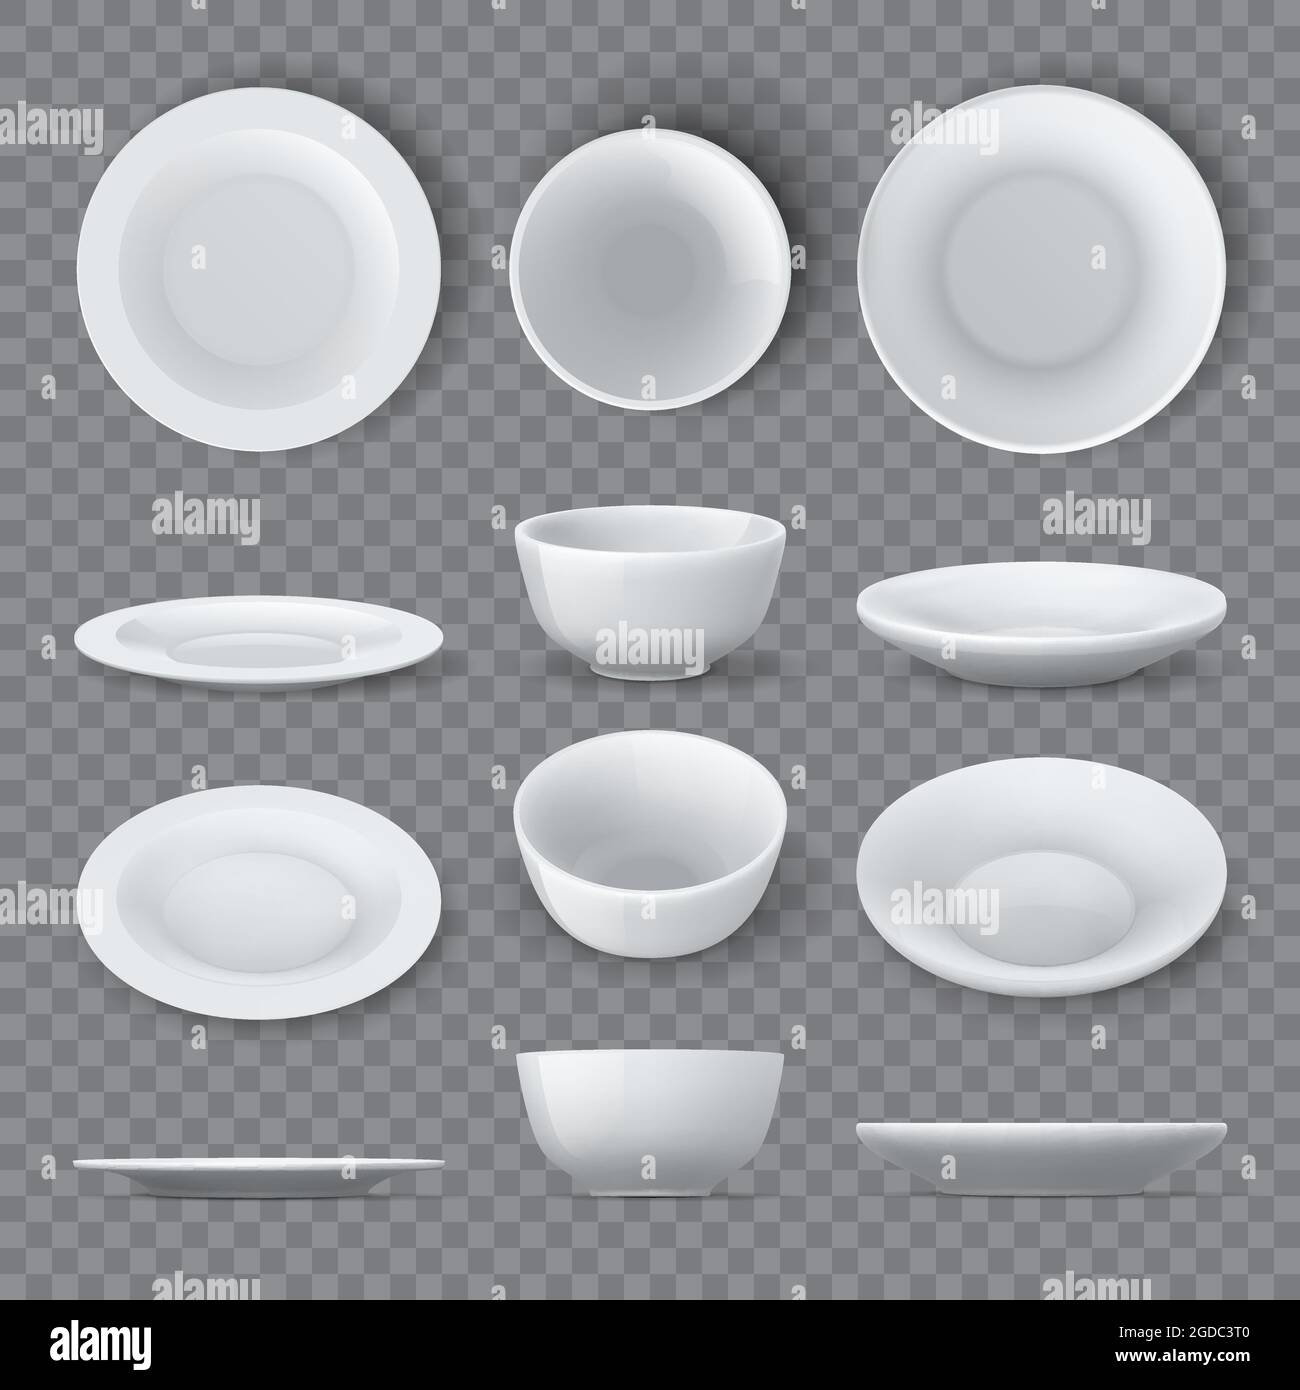 Dinner plates mockups. Realistic white ceramic dishes and empty bowl top, angle and side views. Porcelain round tableware dish 3d vector set Stock Vector